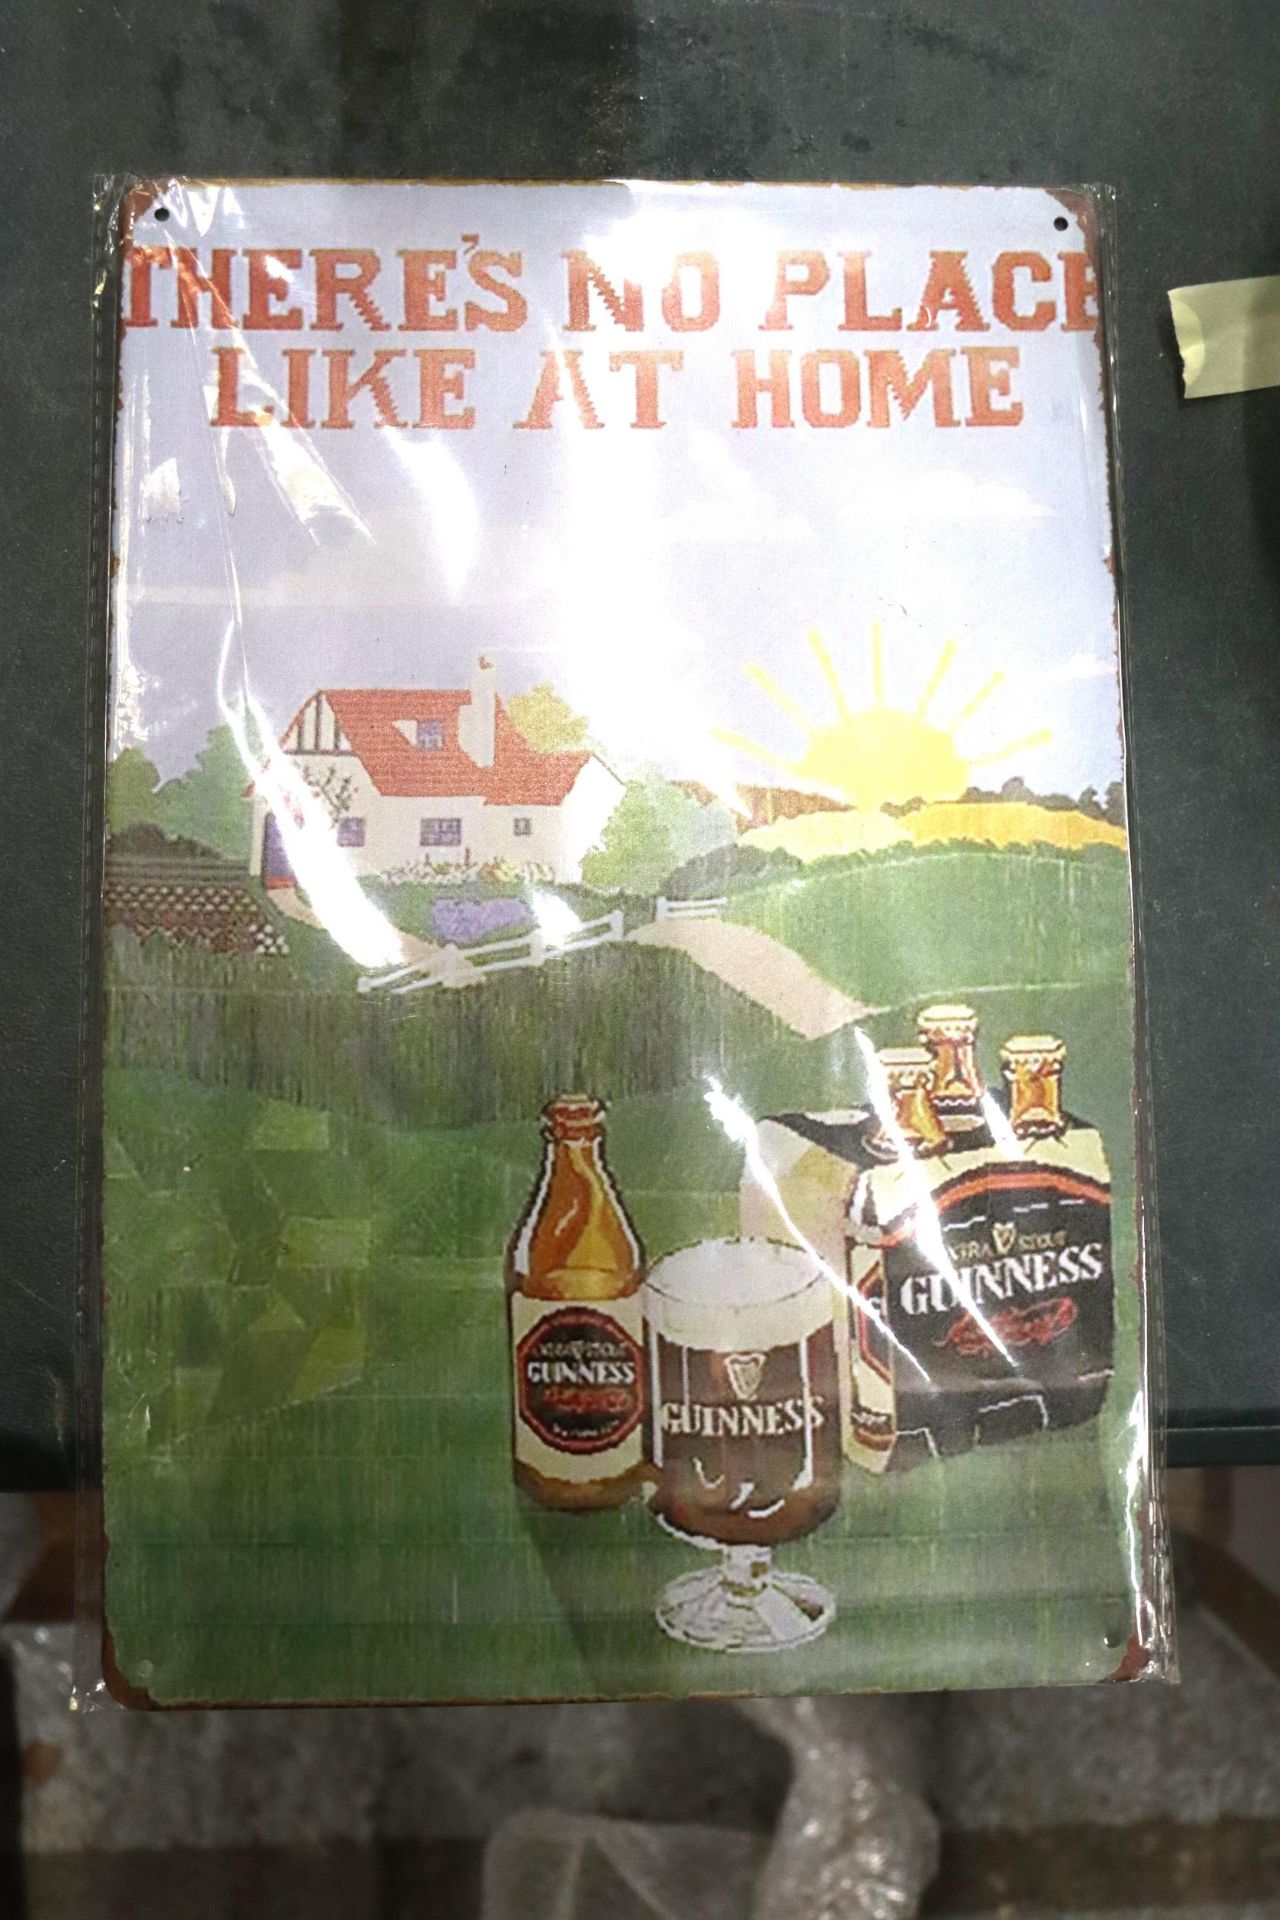 A MAN CAVE METAL SIGN, 'THERE'S NO PLACE LIKE AT HOME'